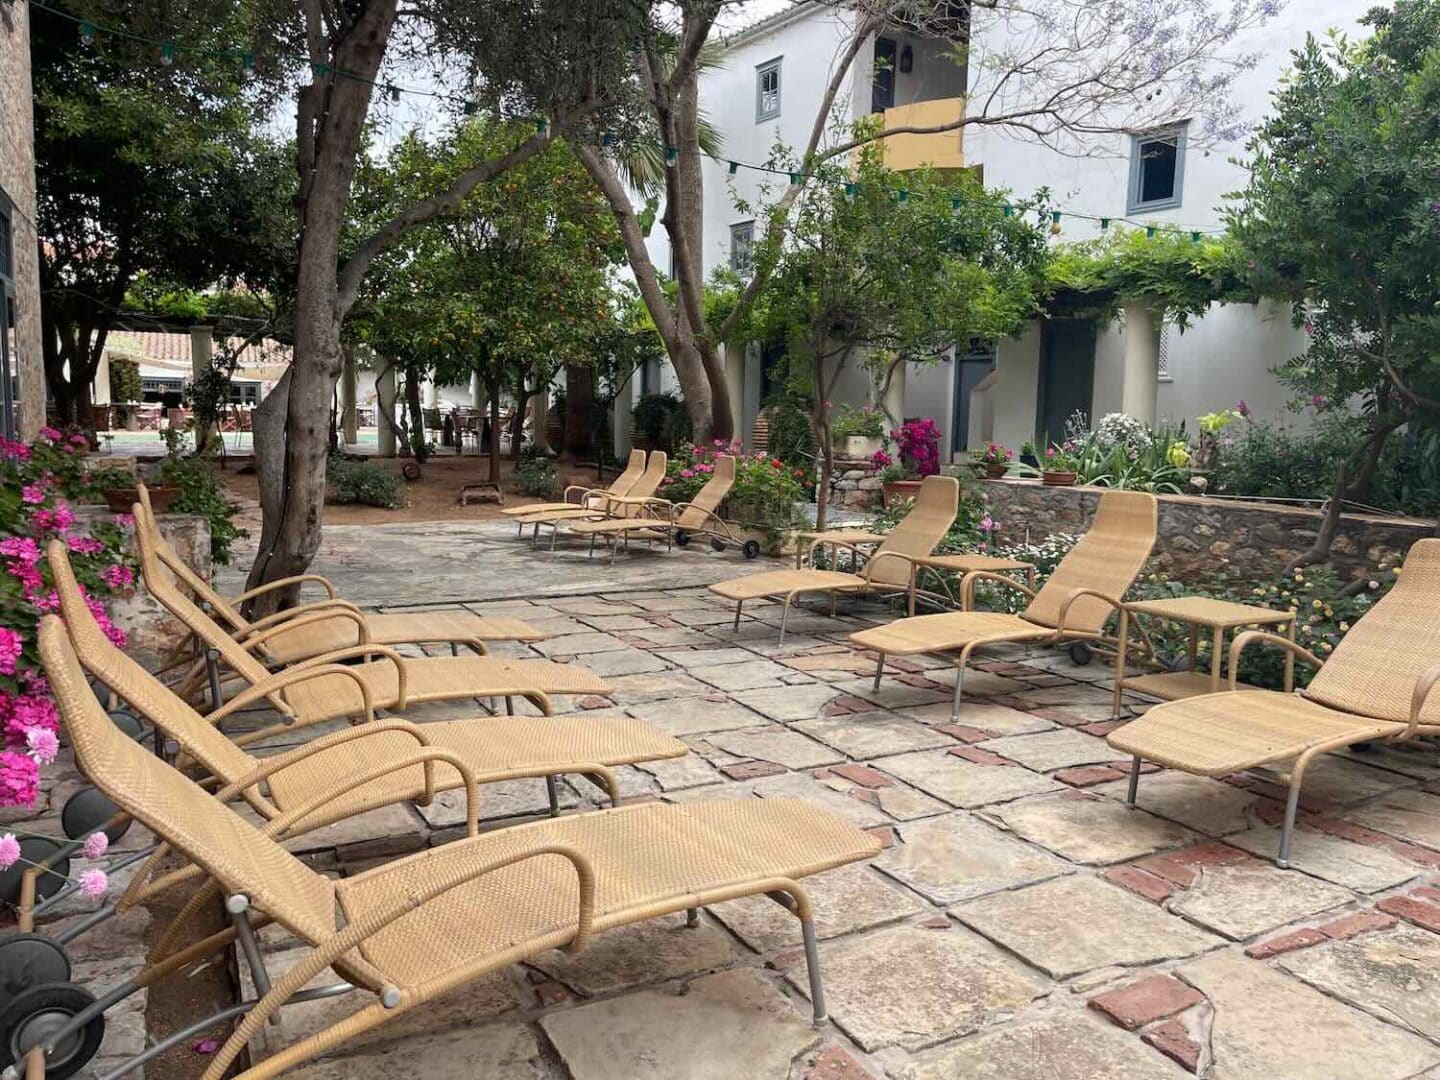 Tranquil outdoor seating area at a Hydra hotel, with wicker chairs surrounded by lush greenery and vibrant flowers, ideal for enjoying the island's peaceful ambiance.